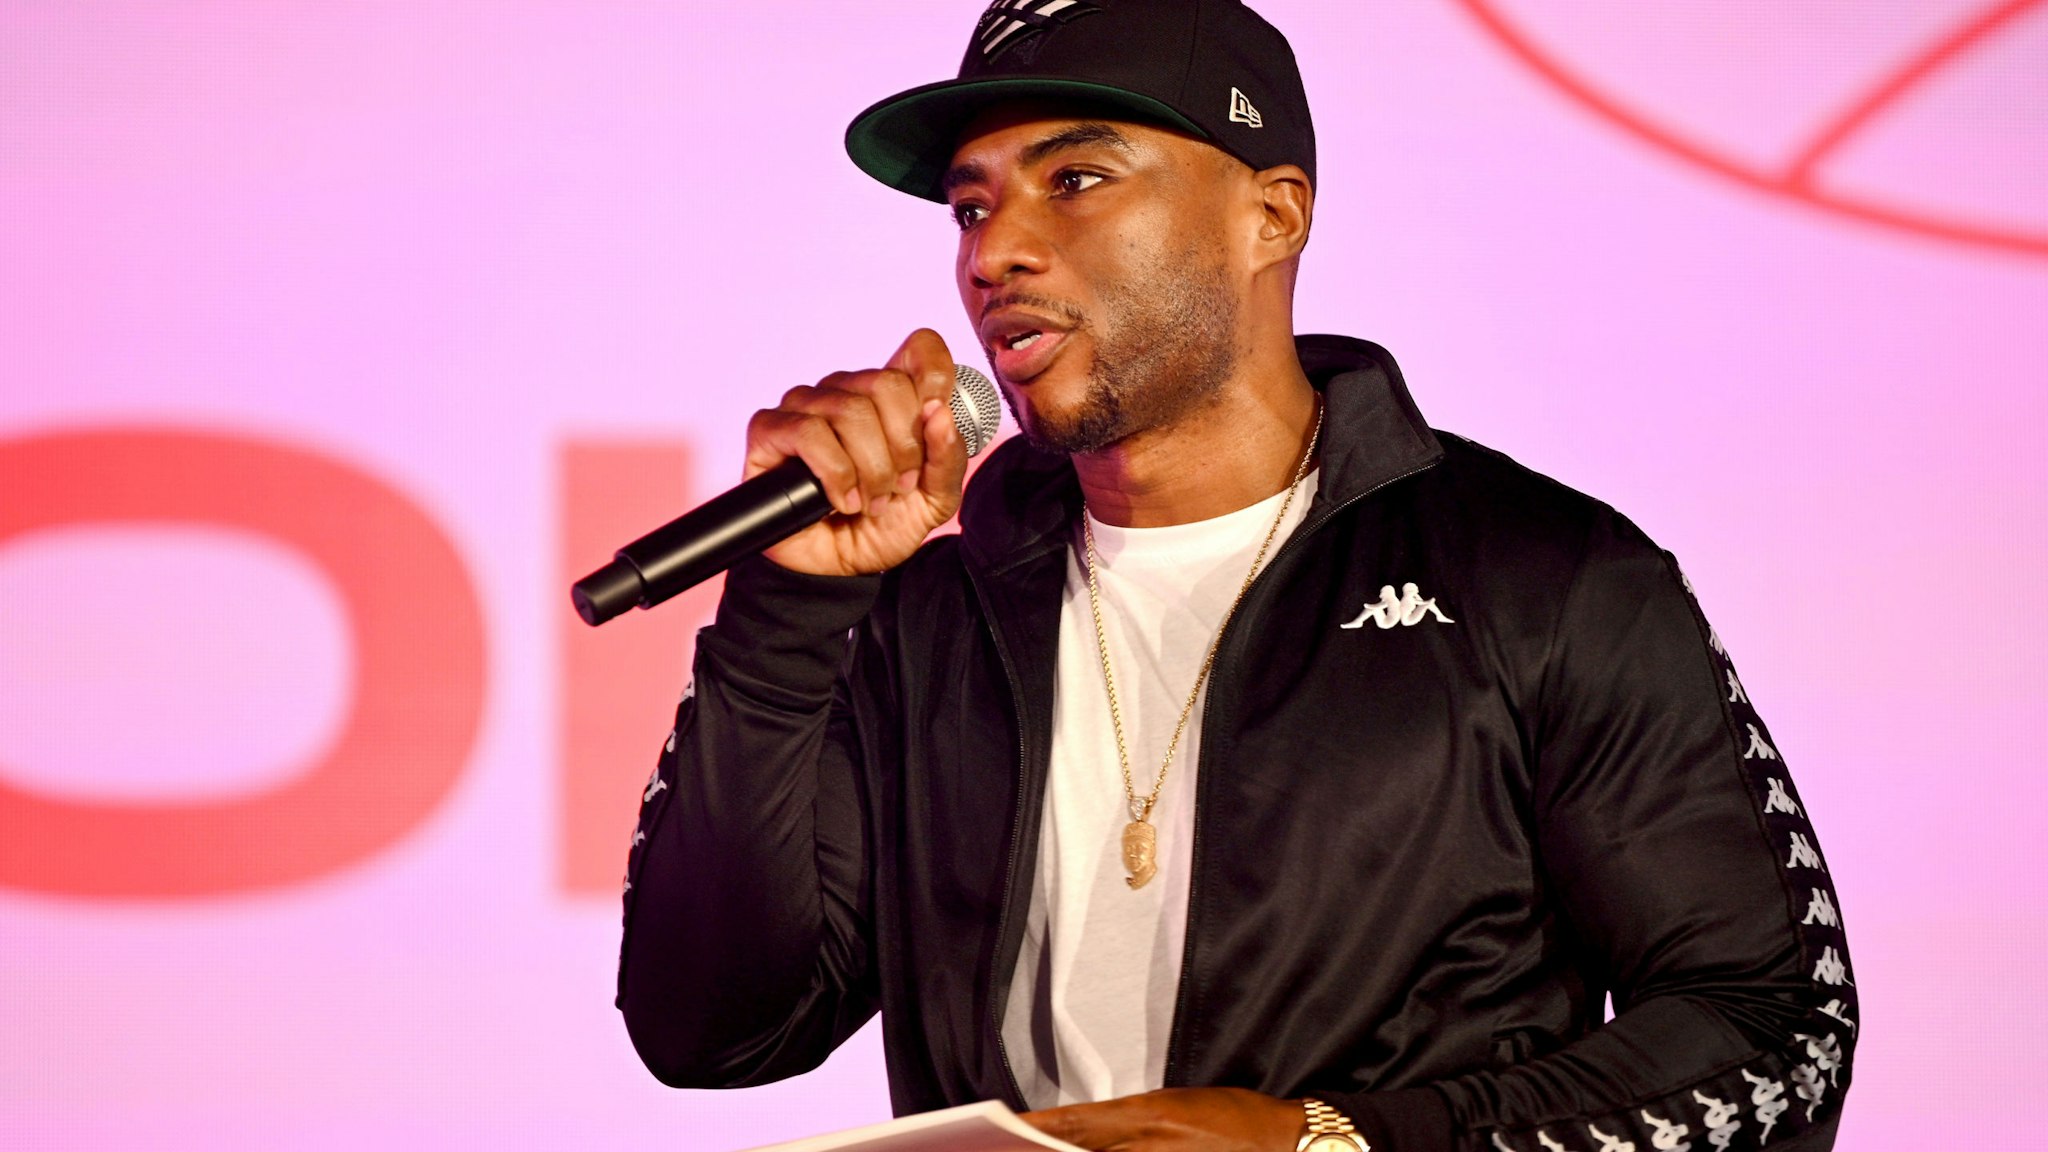 NEW YORK, NEW YORK - APRIL 07: Charlamagne Tha God speaks onstage at Beautycon Festival New York 2019 at Jacob Javits Center on April 07, 2019 in New York City.